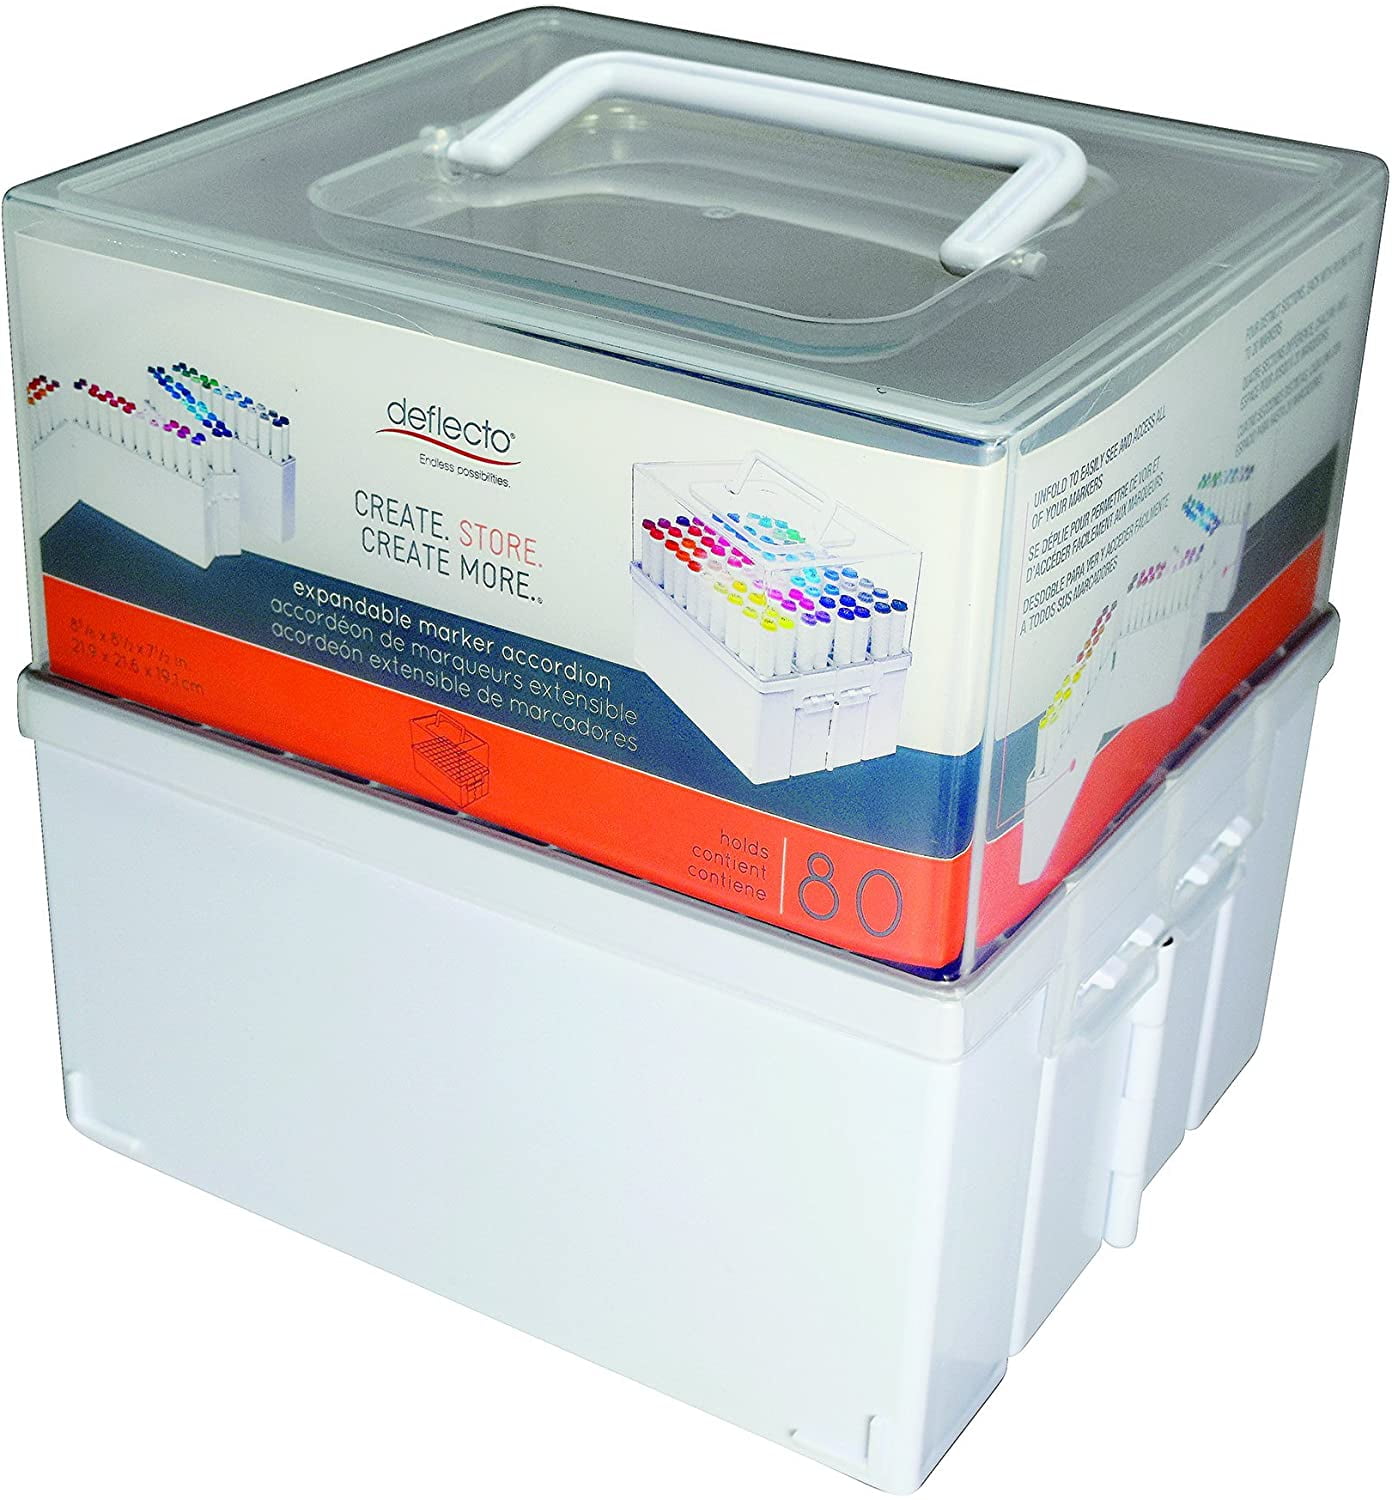 Deflecto Expandable Marker Accordion White Base Stores up to 80 Markers Clear lid, 